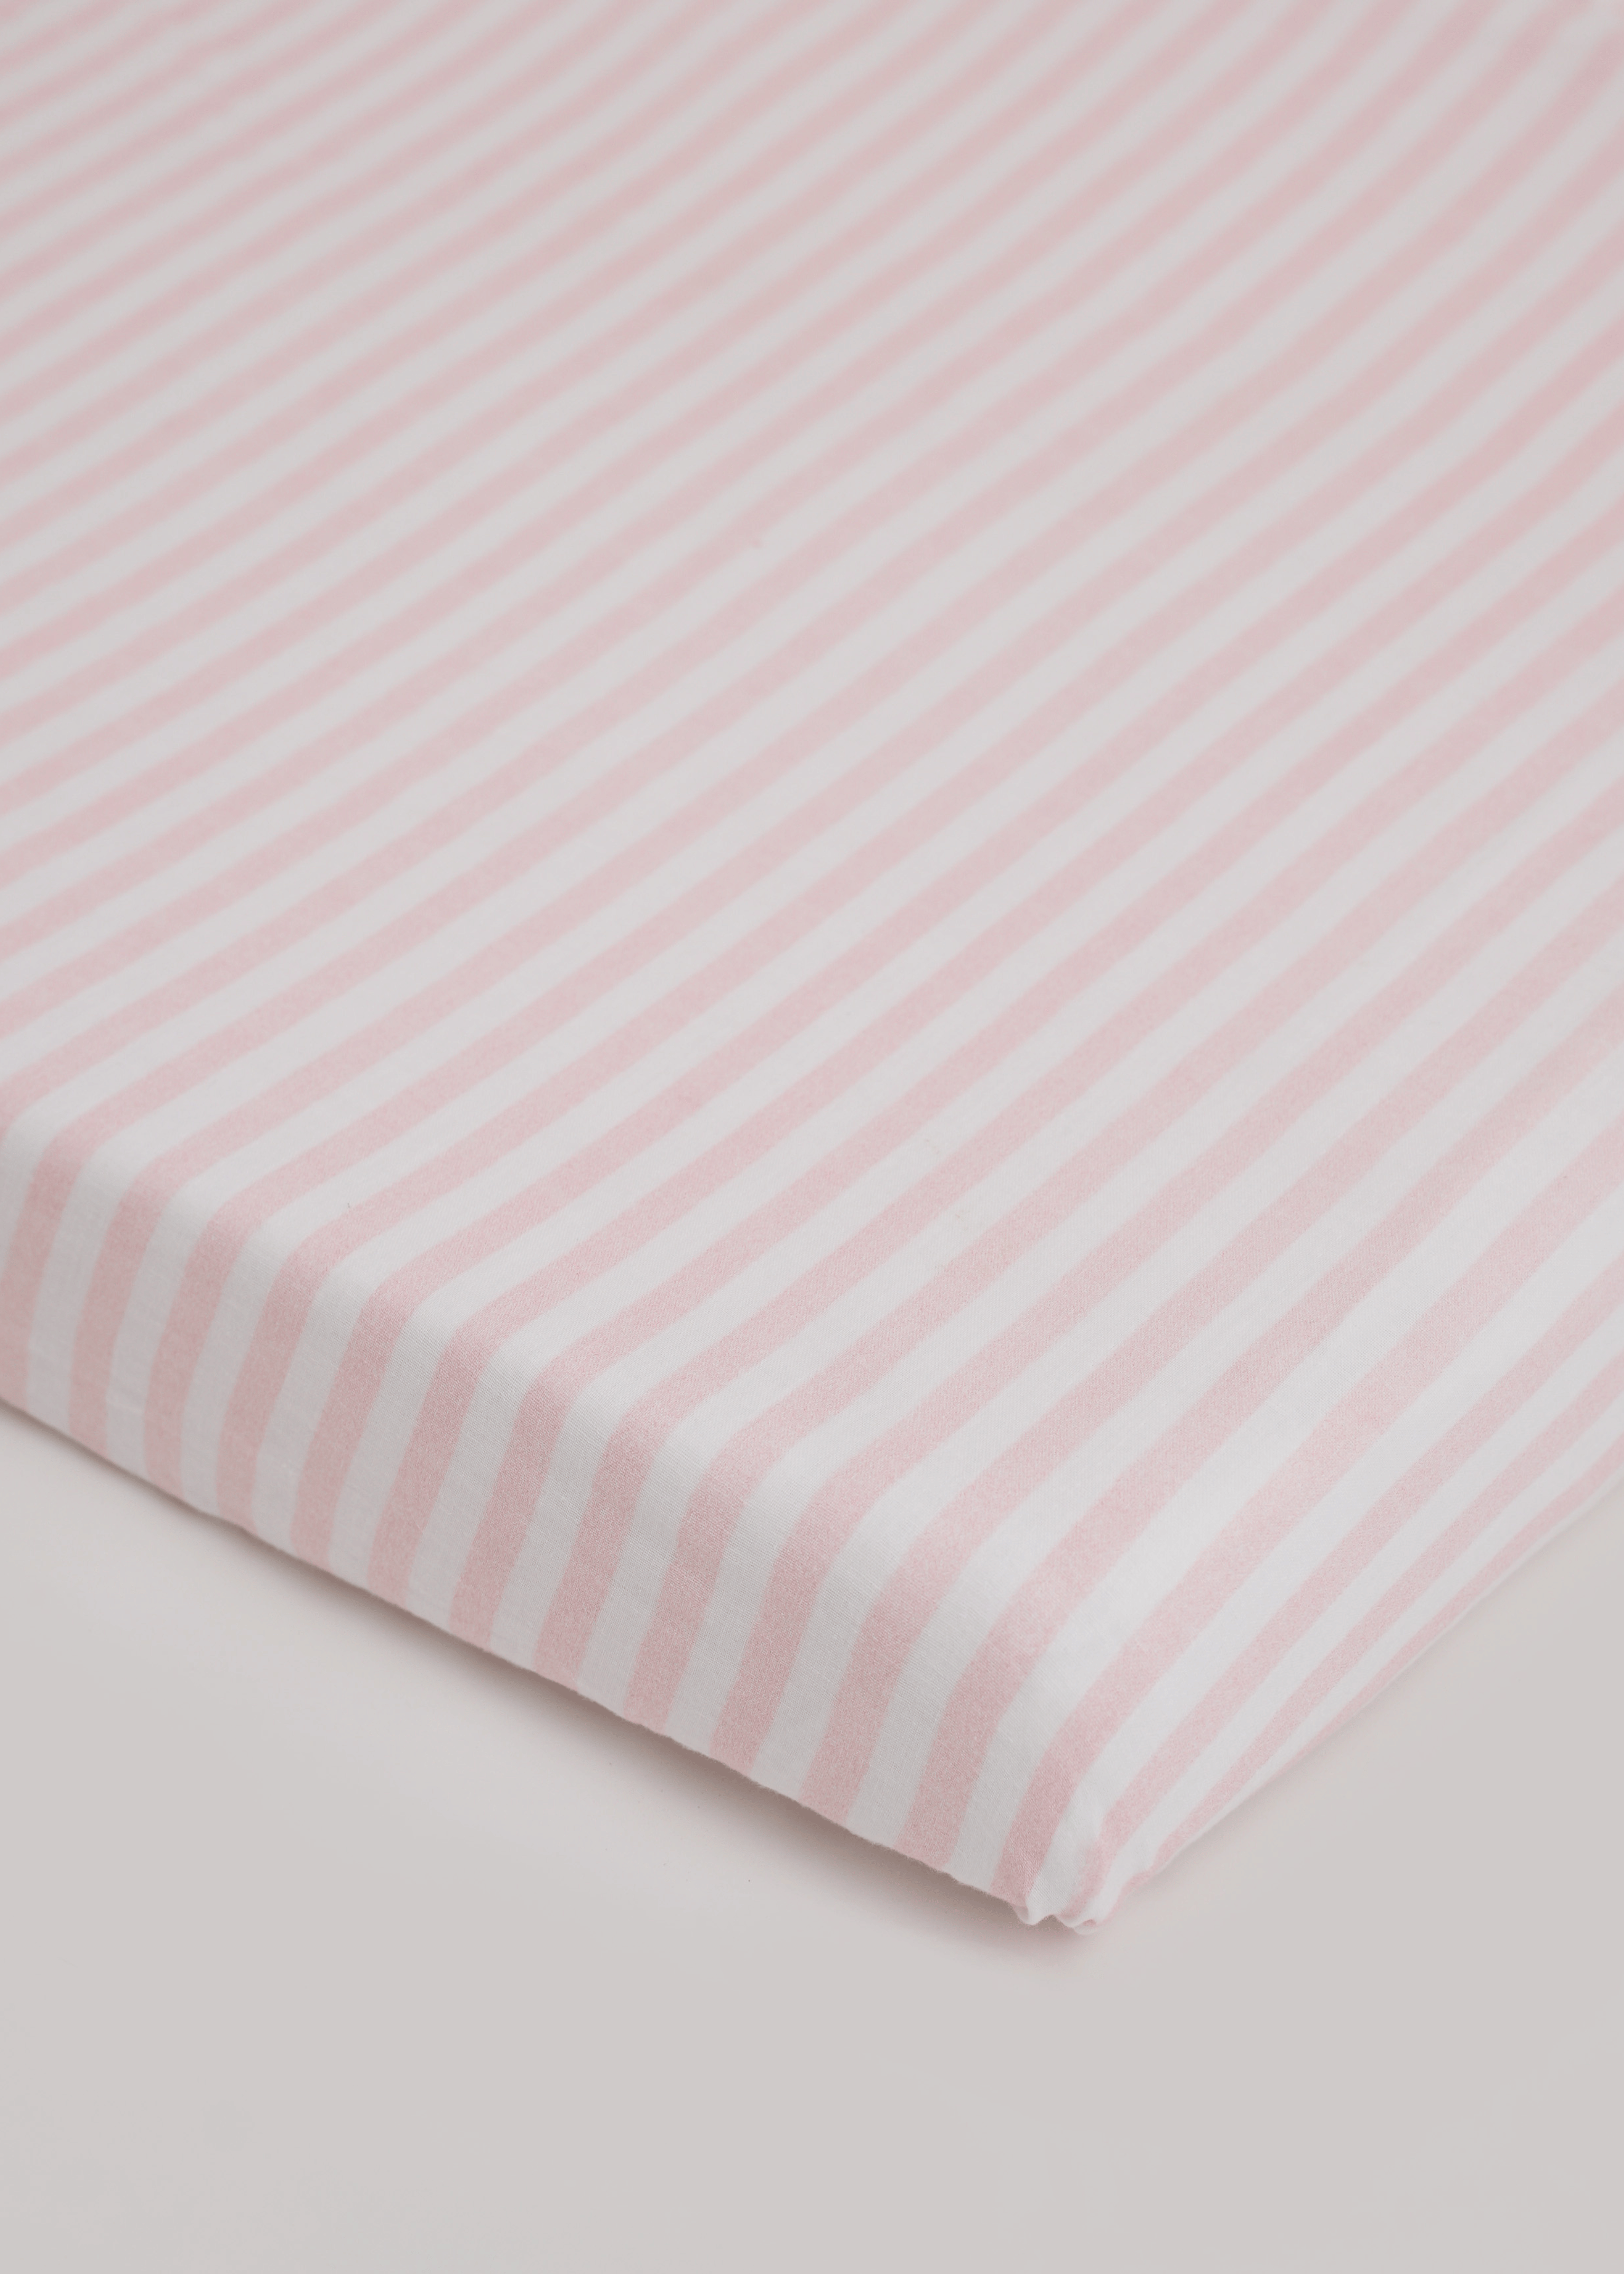 Pink & White Fitted Cot Sheet